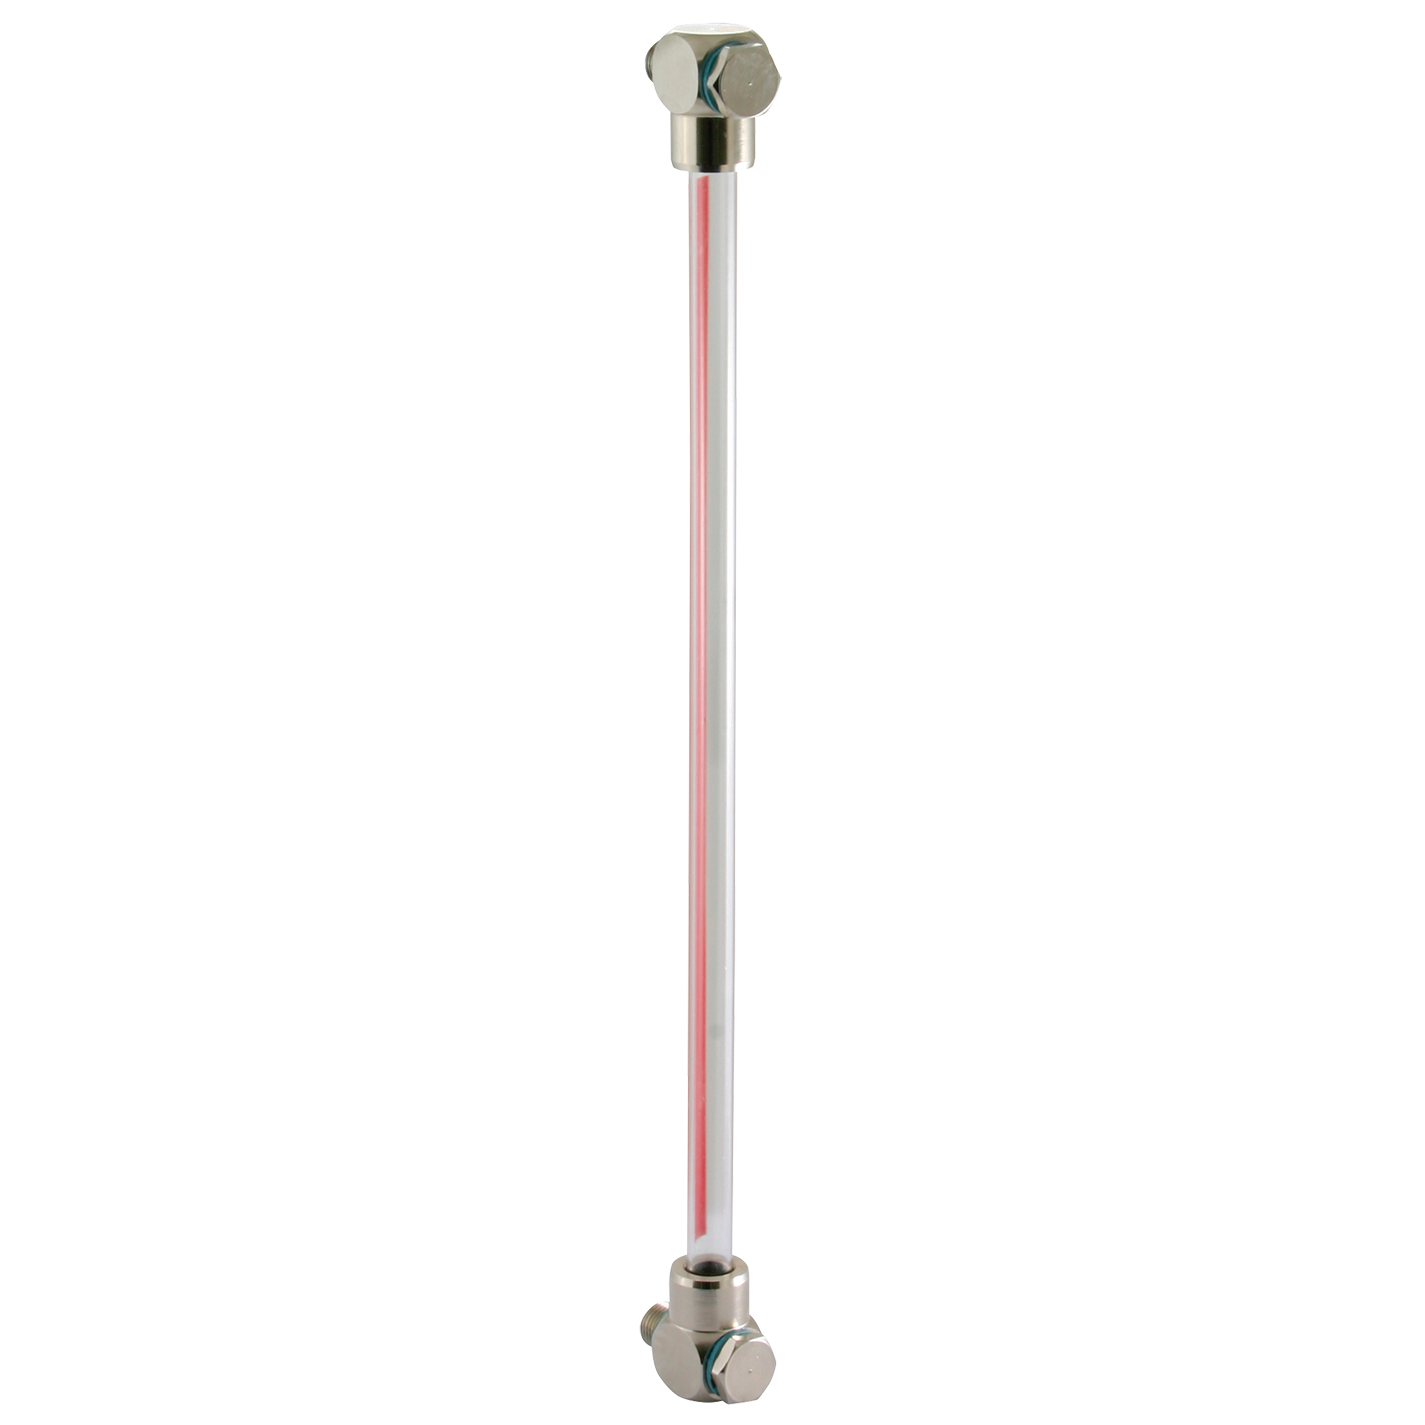 3/8" BSP Fluid Level Gauge W/O Thermometer Centres 650mm